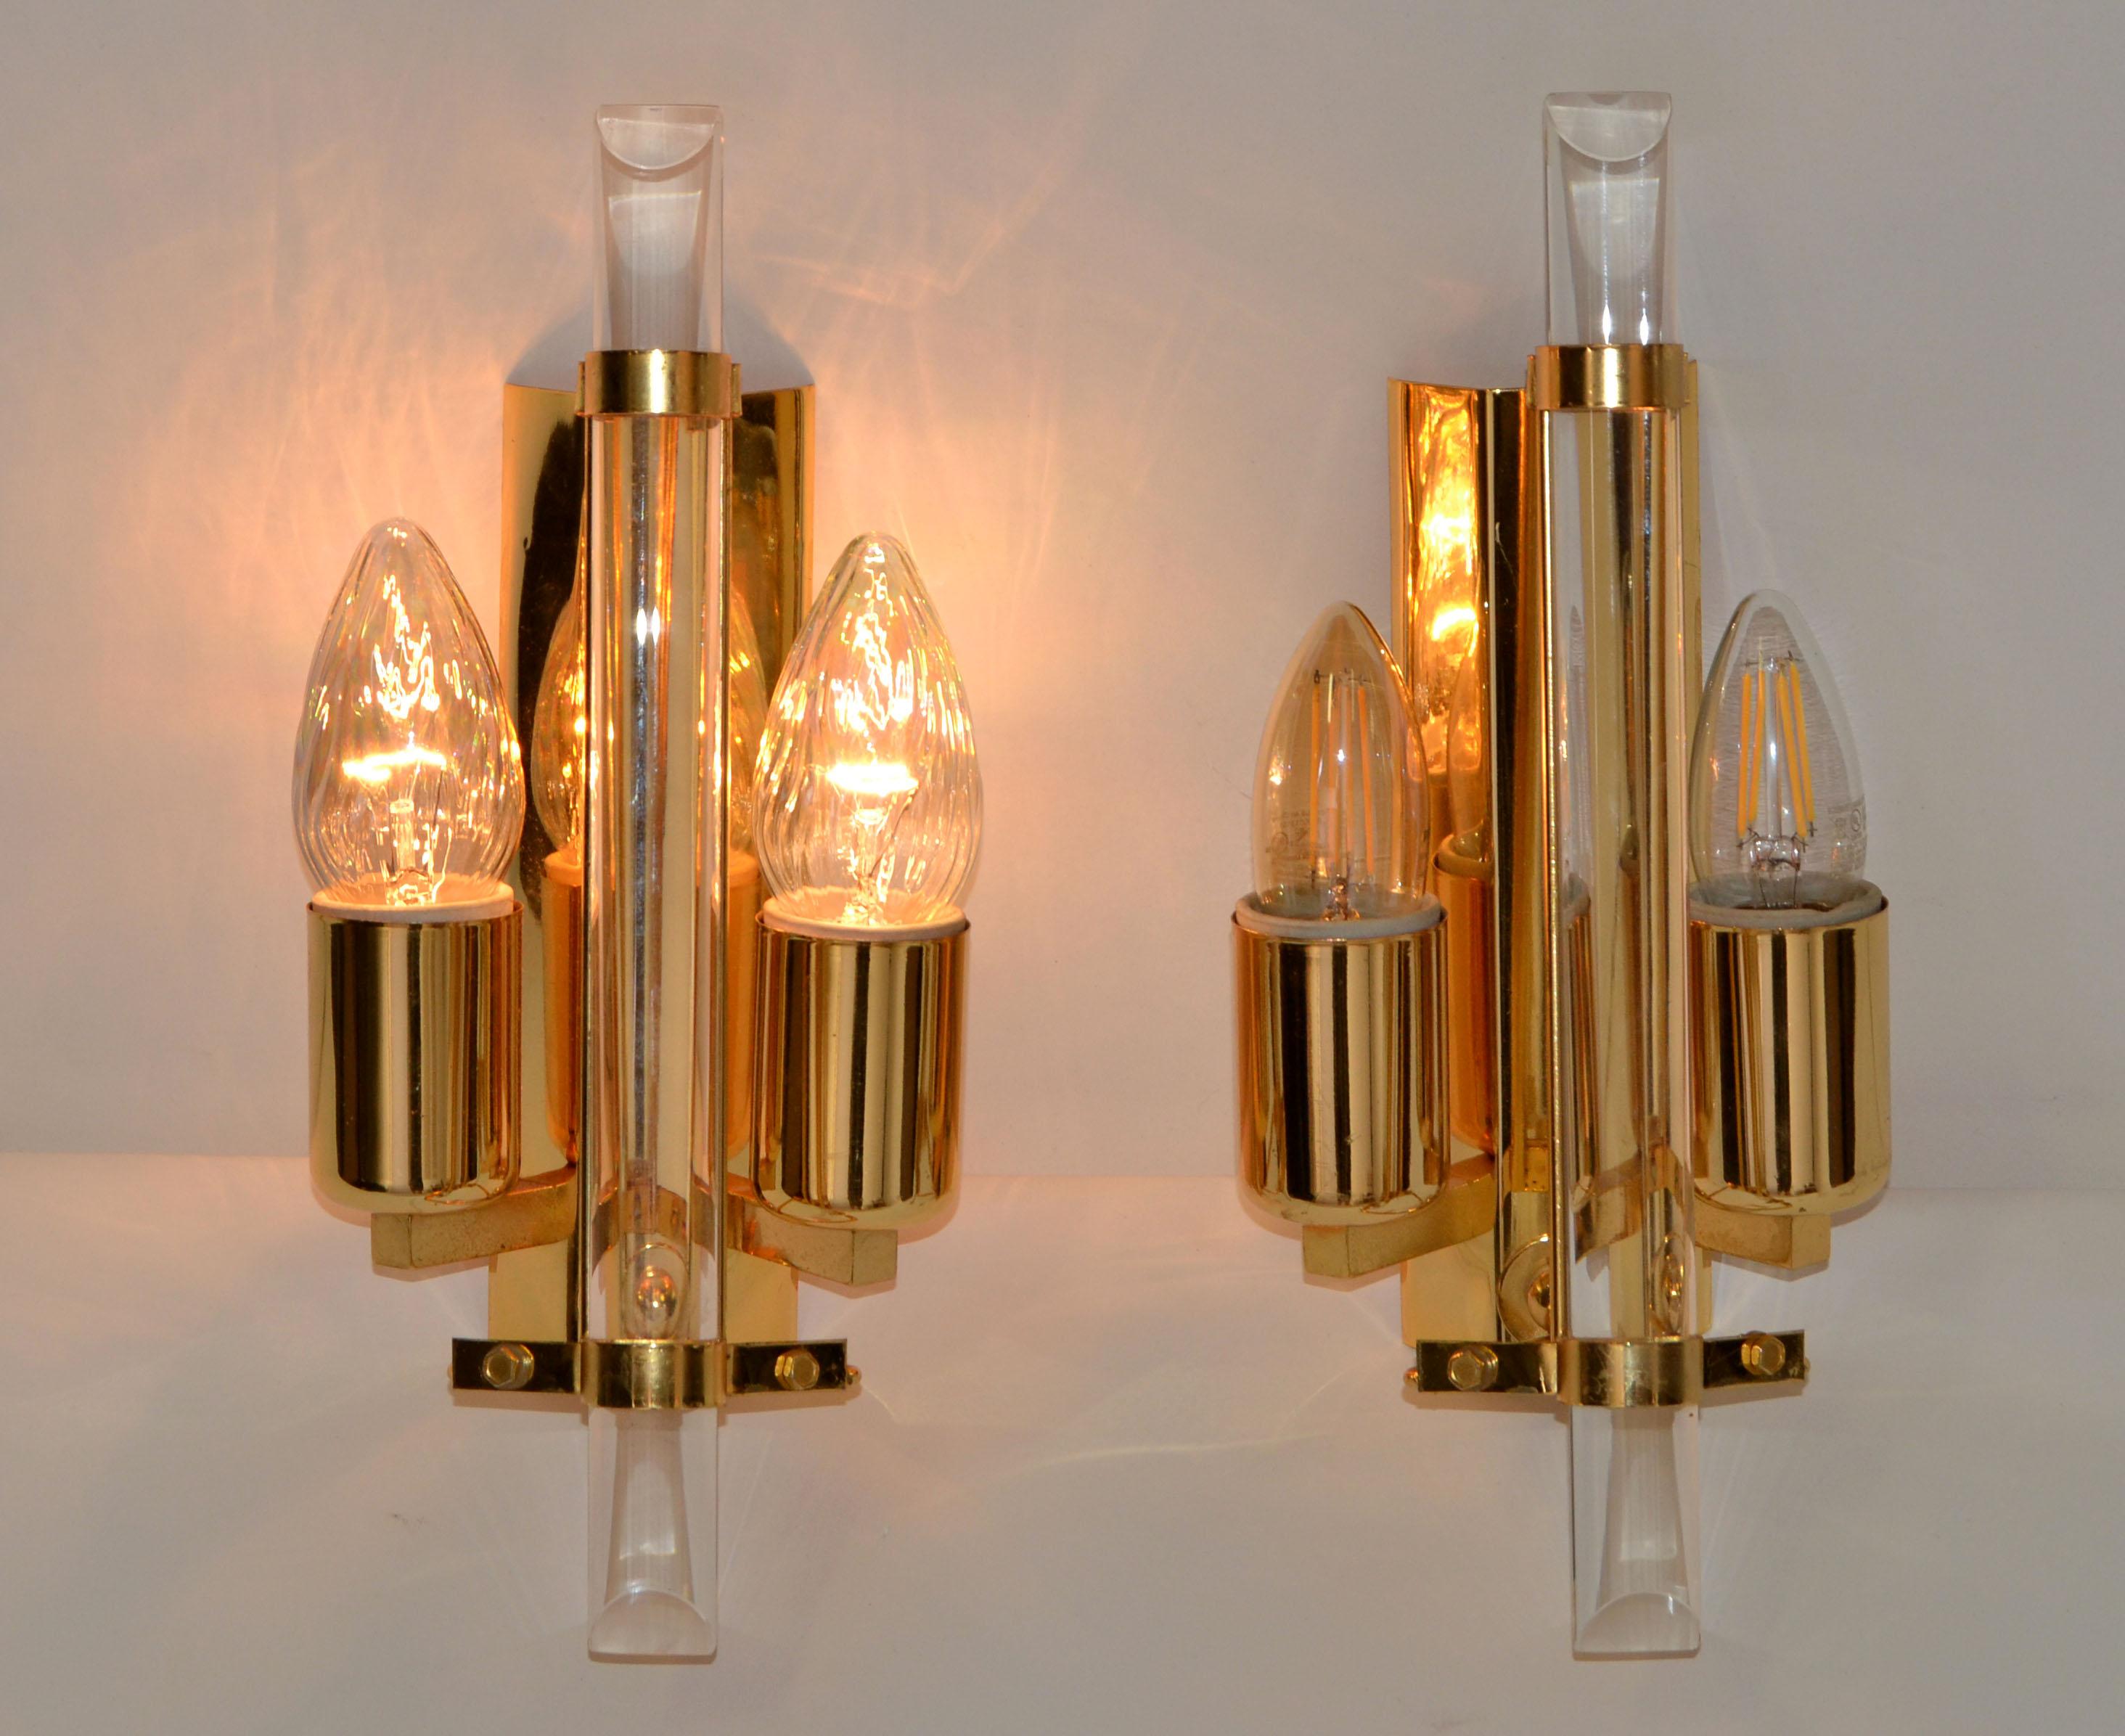 Superb pair of Italian 2 lights Stilkronen sconces, Mid-Century Modern wall lights with Crystal on Gold Plated Frame.
US wiring and each Sconce takes 2 bulbs, 60 watts max.
Back plate: 8.25 x 2.25 inches. 

 